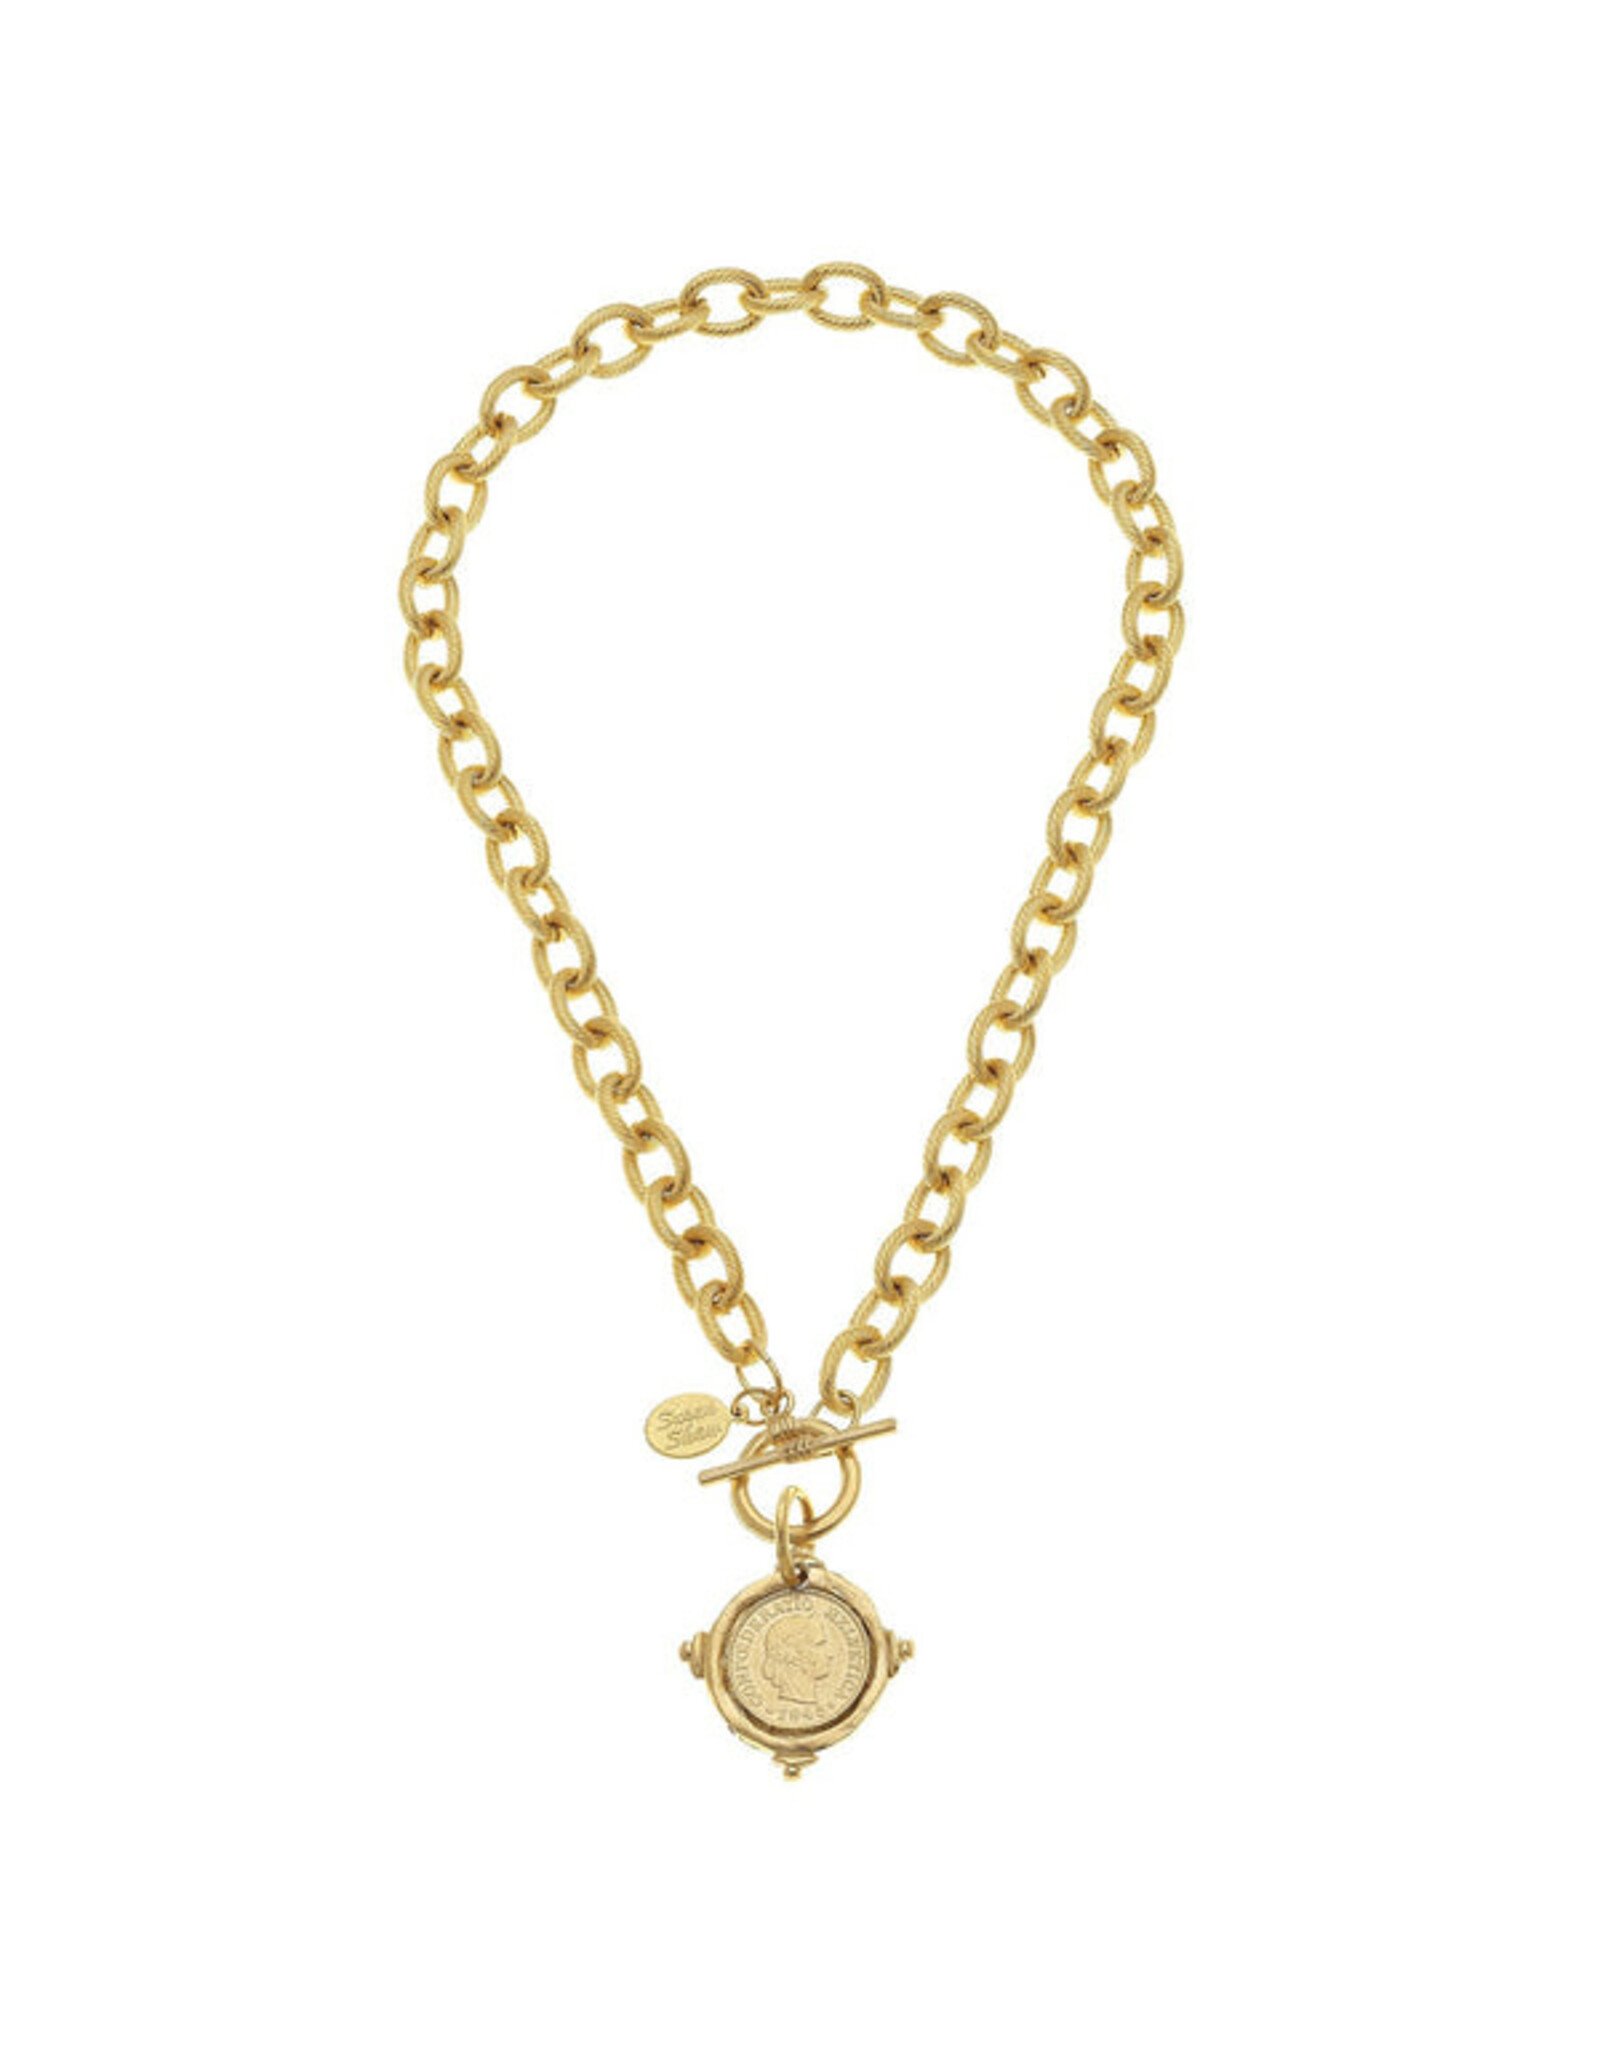 Susan Shaw Coin Toggle Necklace - 20 Inches